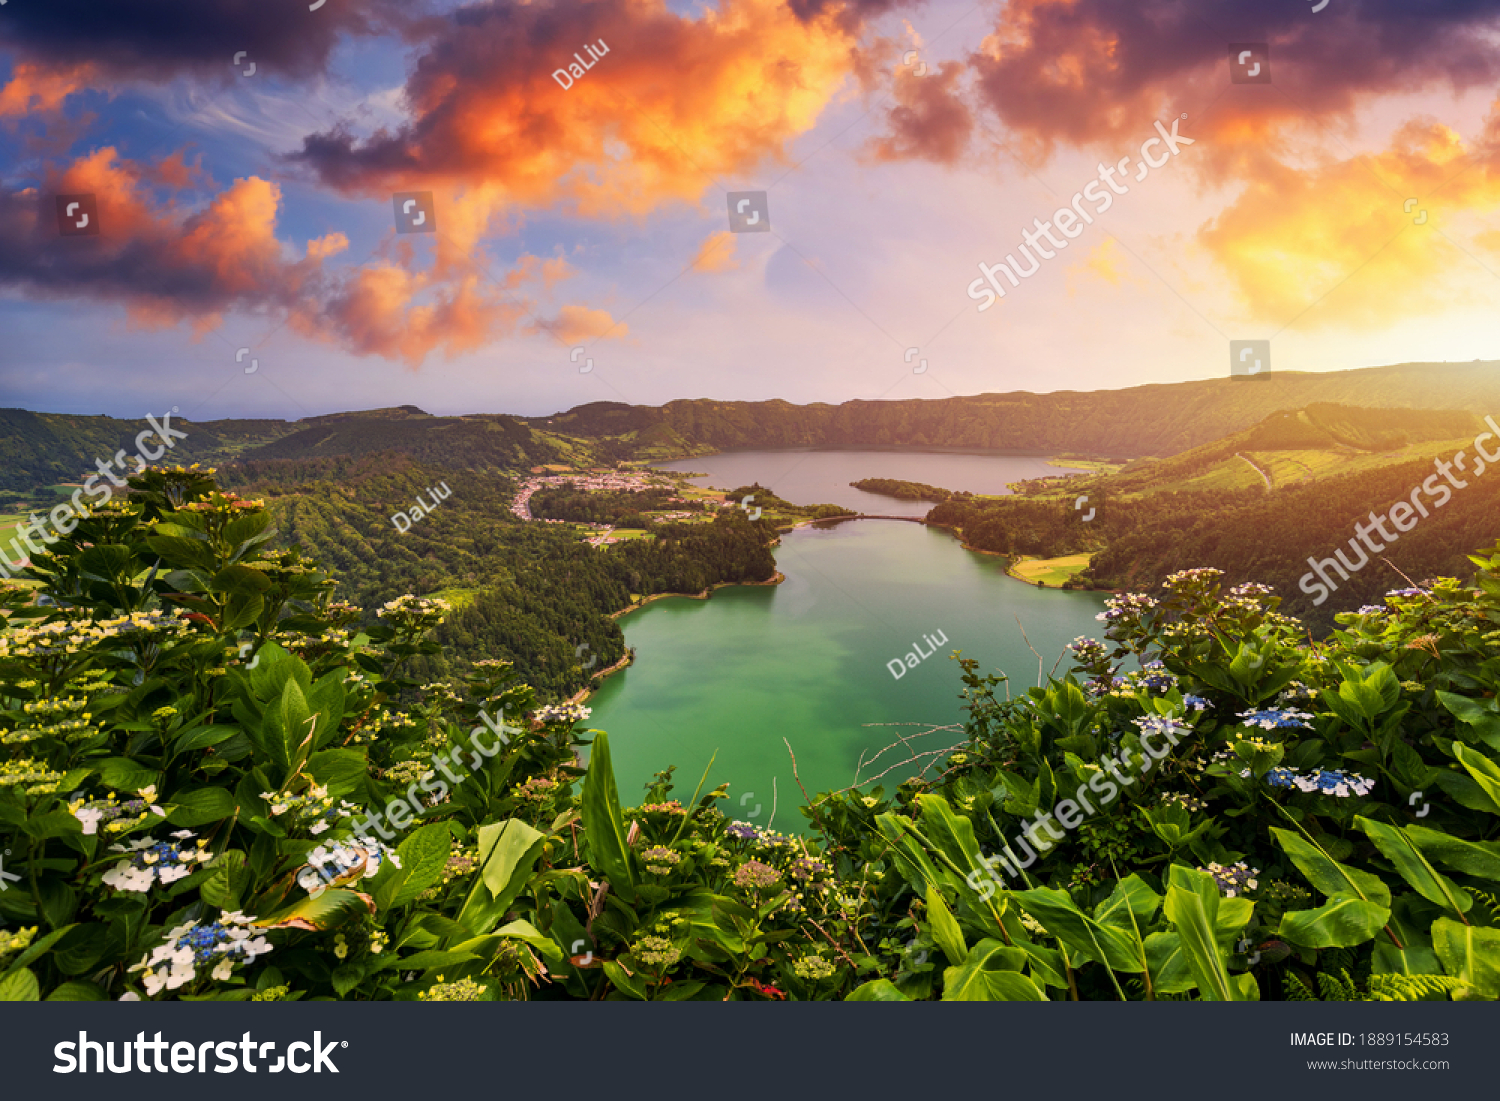 Beautiful view of Seven Cities Lake "Lagoa das Sete Cidades" from Vista do Rei viewpoint in São Miguel Island, Azores, Portugal. Lagoon of the Seven Cities, Sao Miguel island, Azores, Portugal. #1889154583